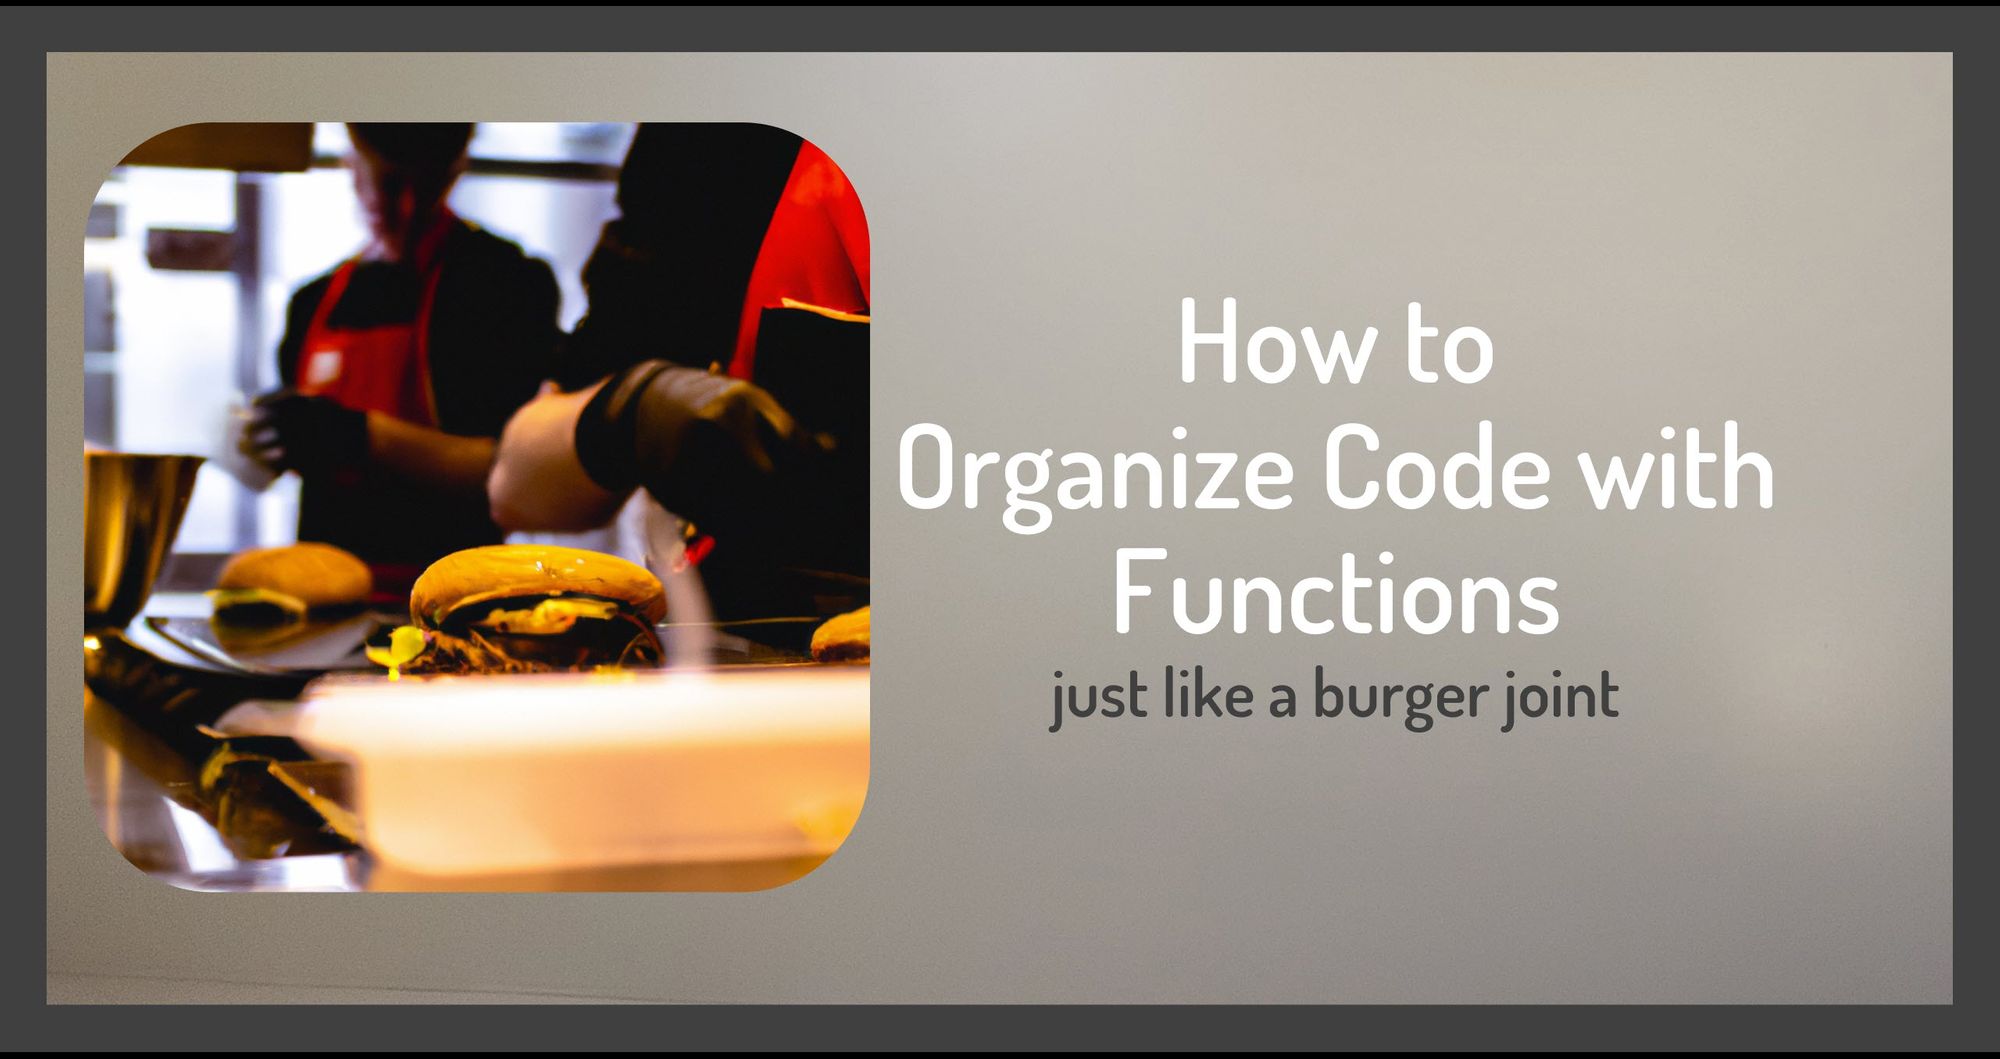 How to Organize Your Code with Functions